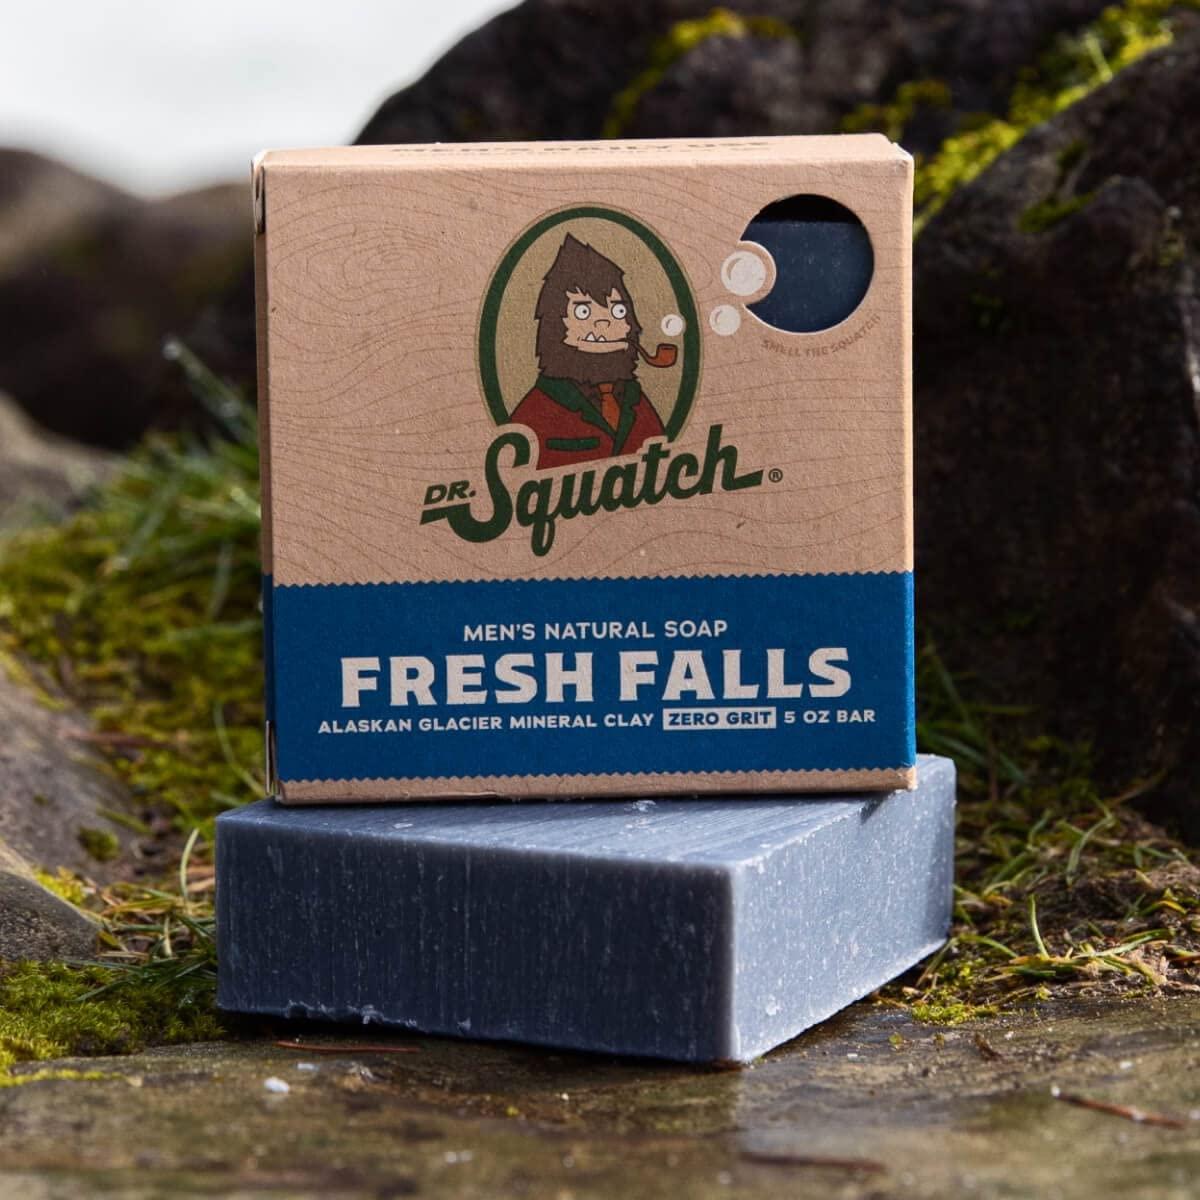 Dr. Squatch All Natural Bar Soap for Men with Zero Grit, Freedom Fresh